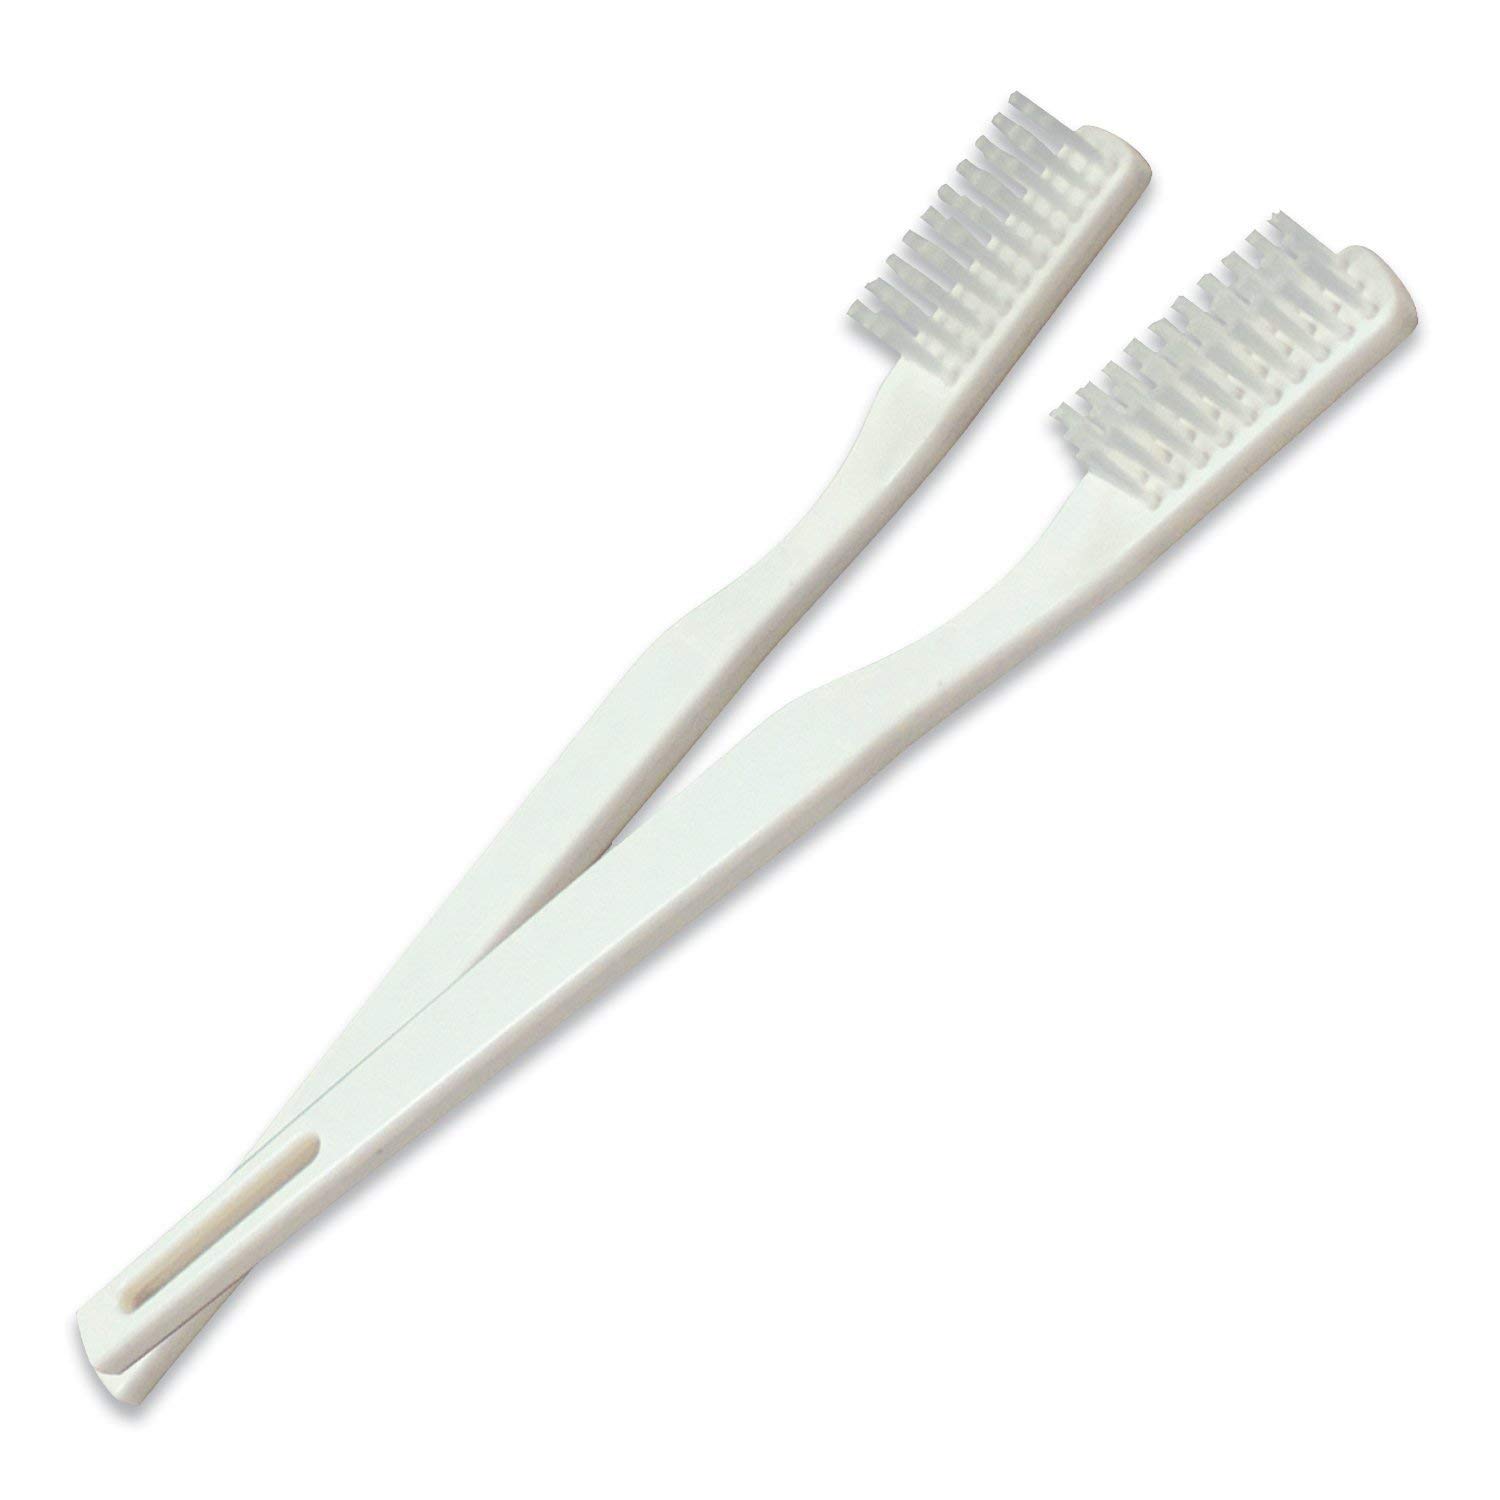 Toothbrushes photo